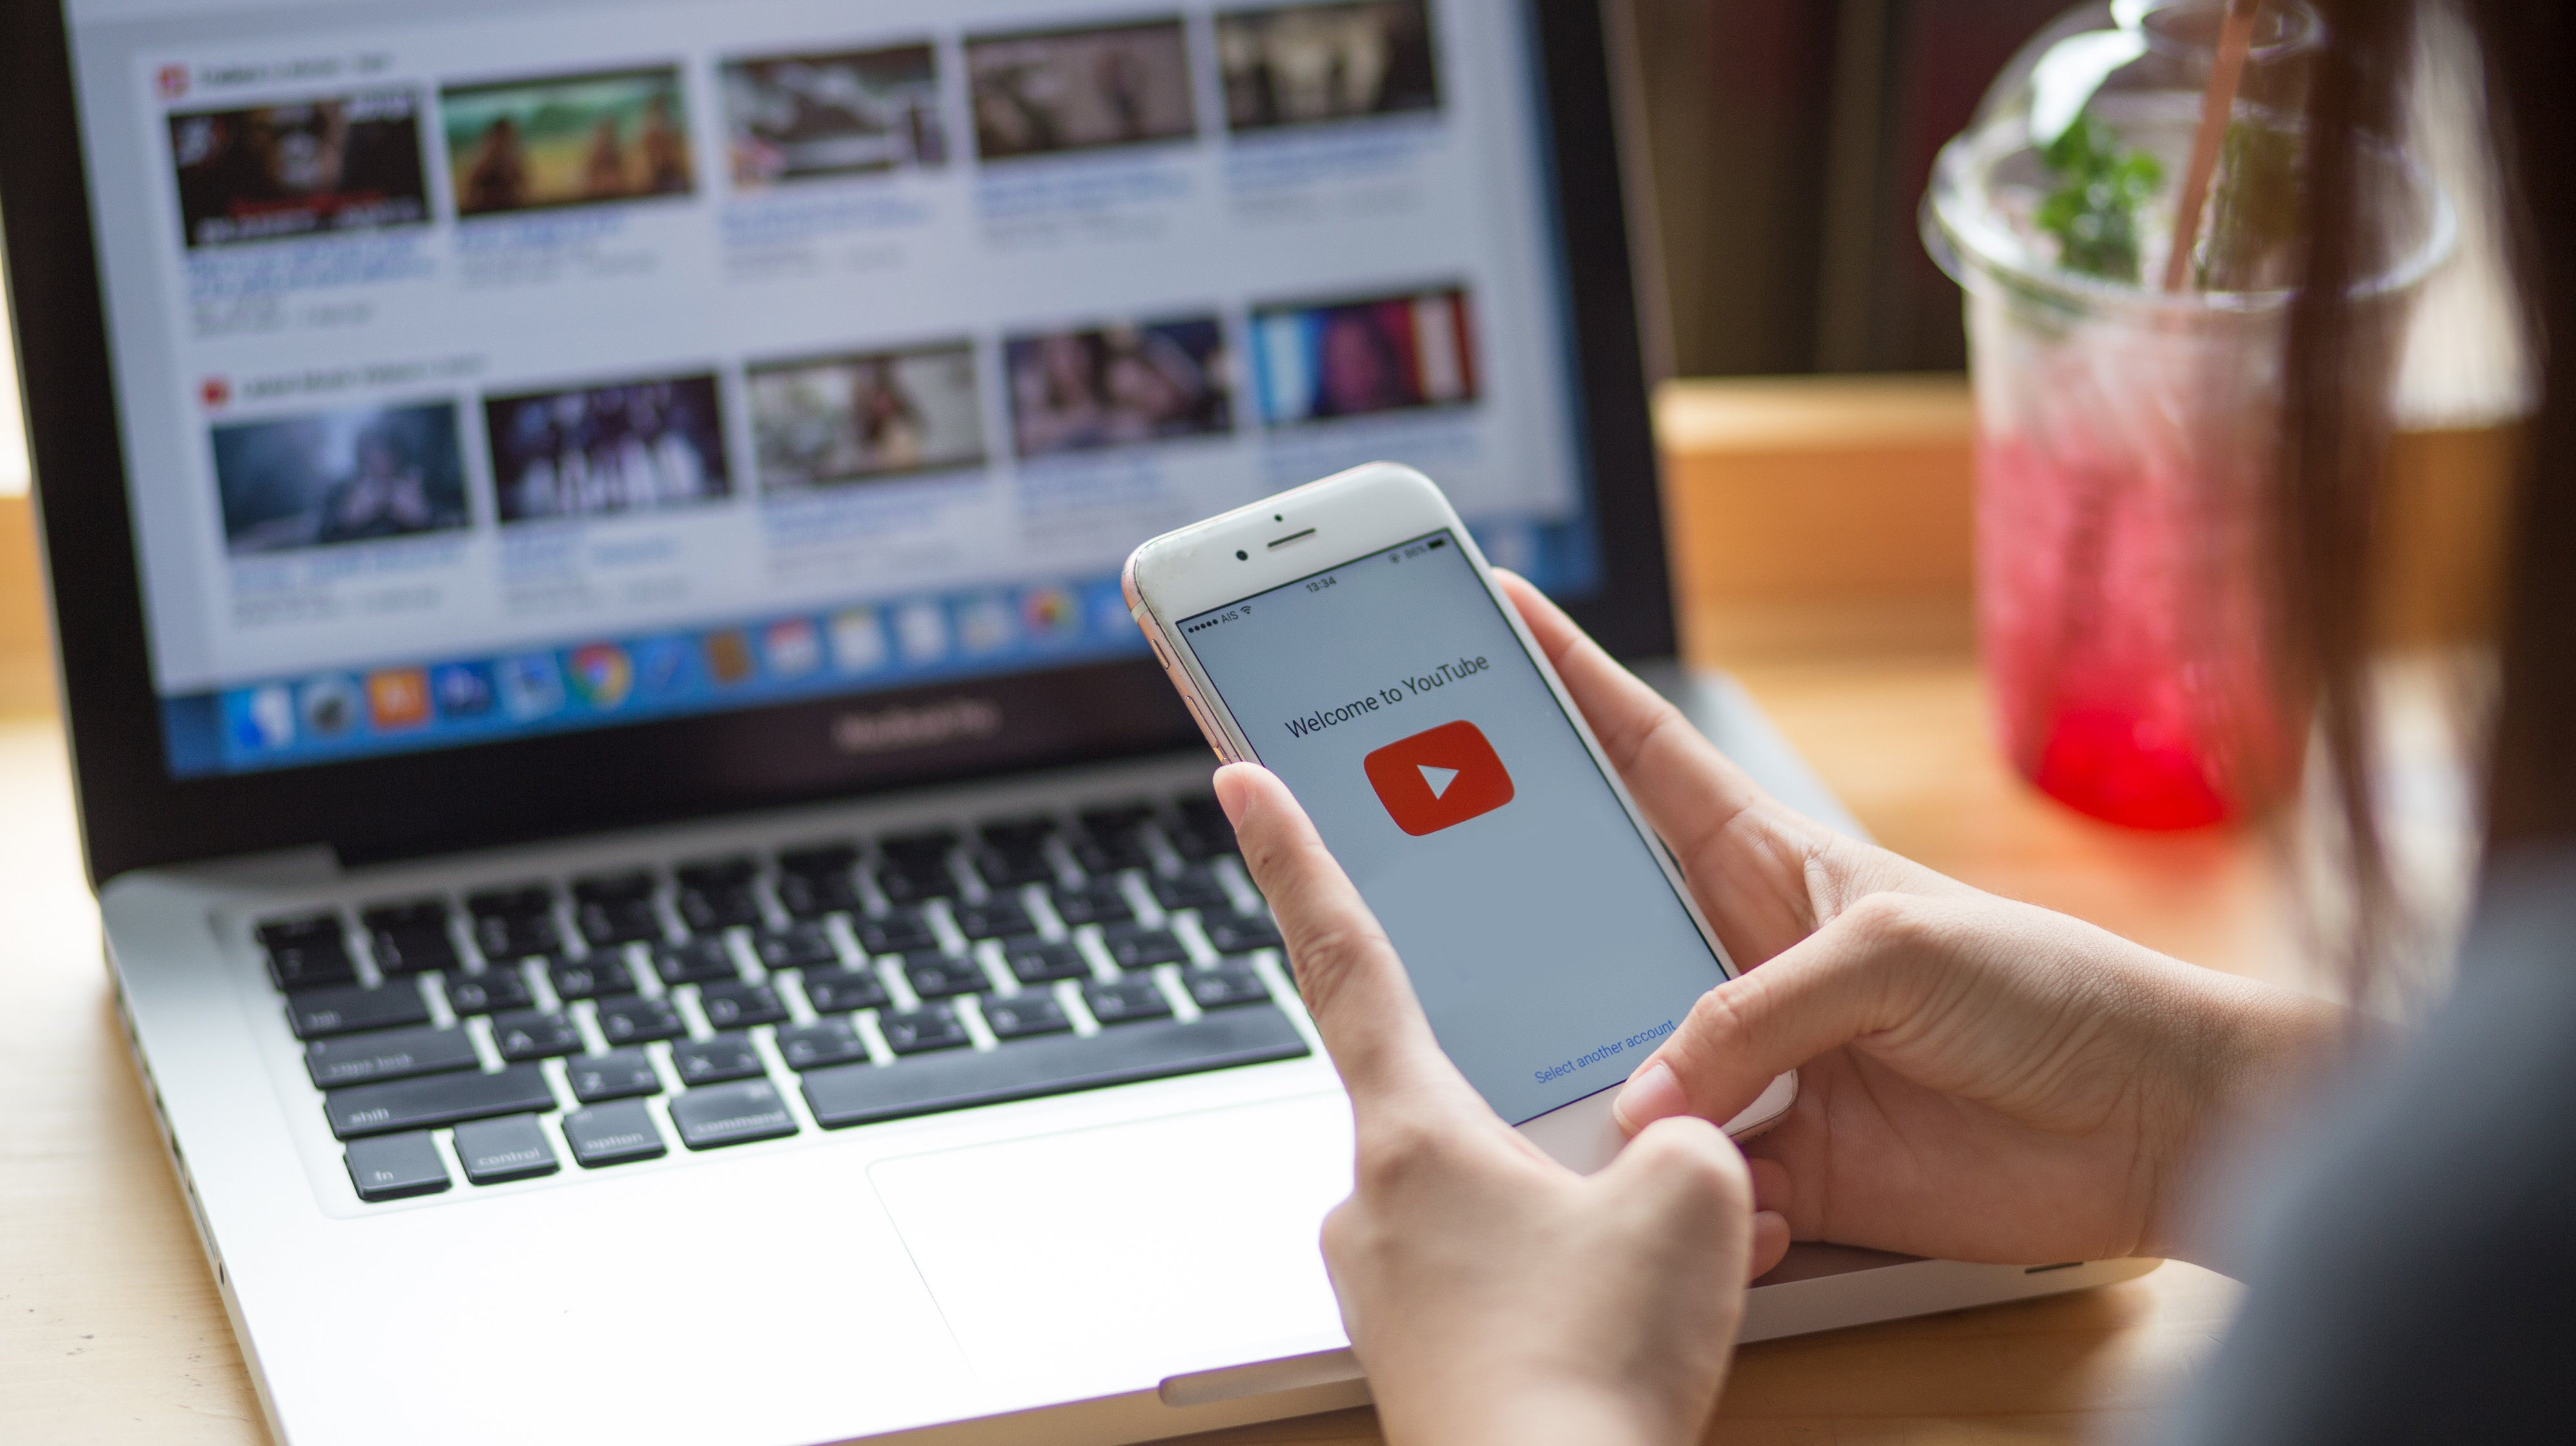 Explore The Depths Of YouTube With This Site